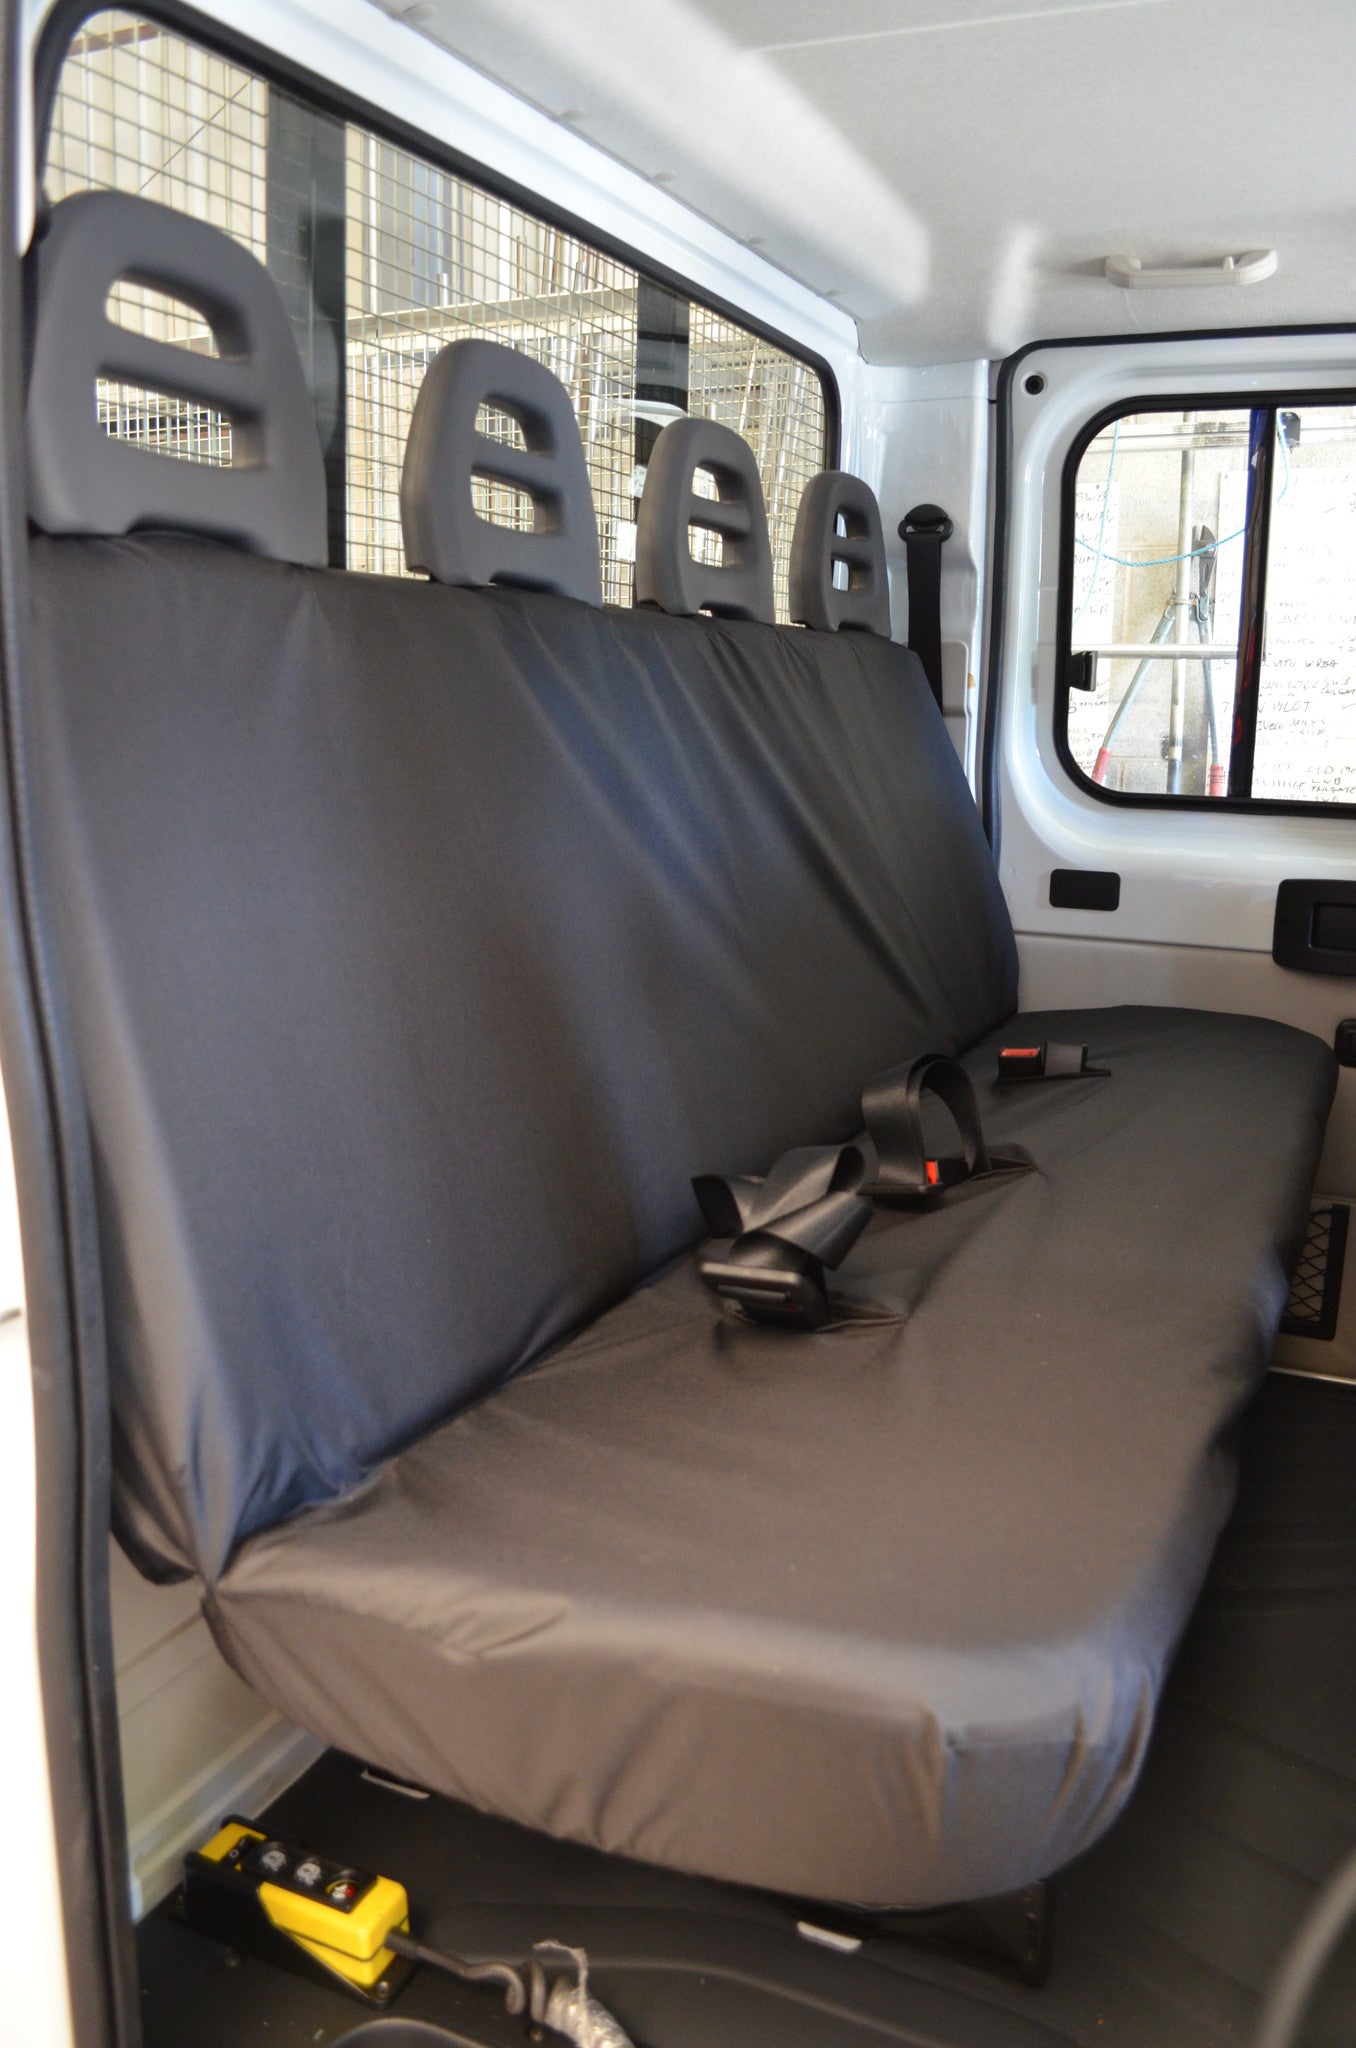 Fiat Ducato Van 2006 Onwards Tailored Seat Covers Crew Cab Rear Seats / Black Turtle Covers Ltd